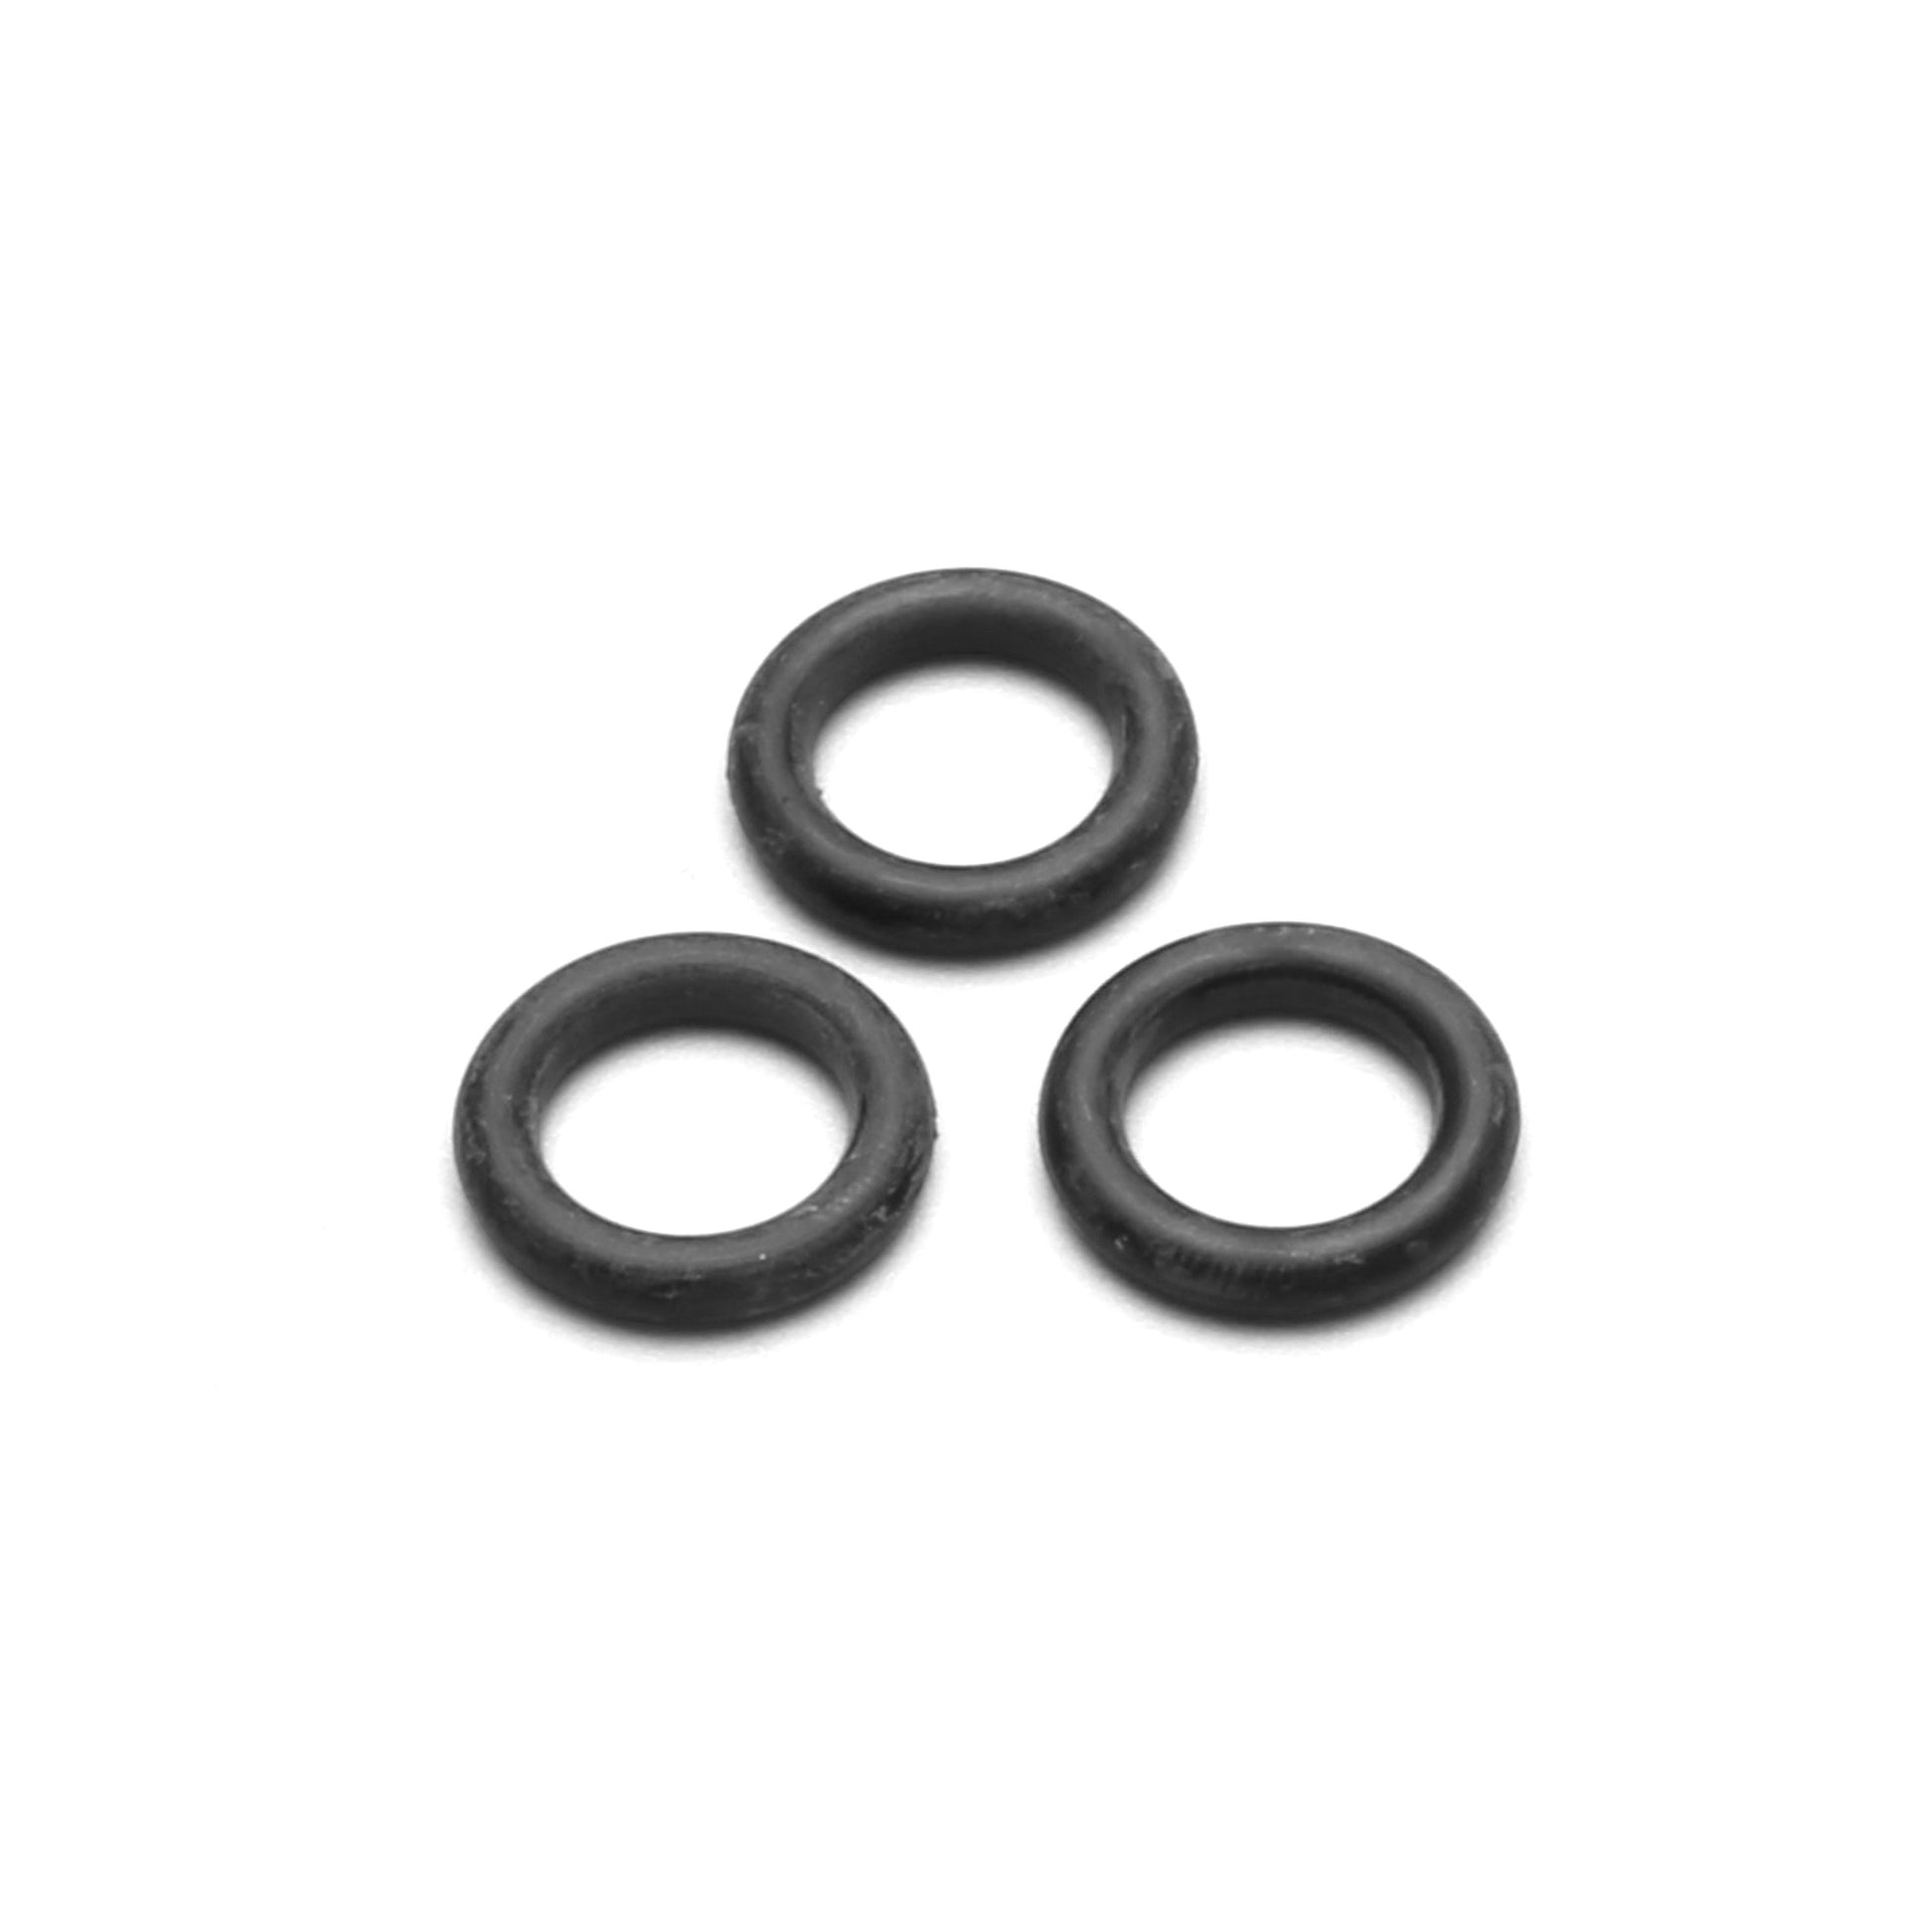 Hoselink USA Quick-Connect Spare O-Rings